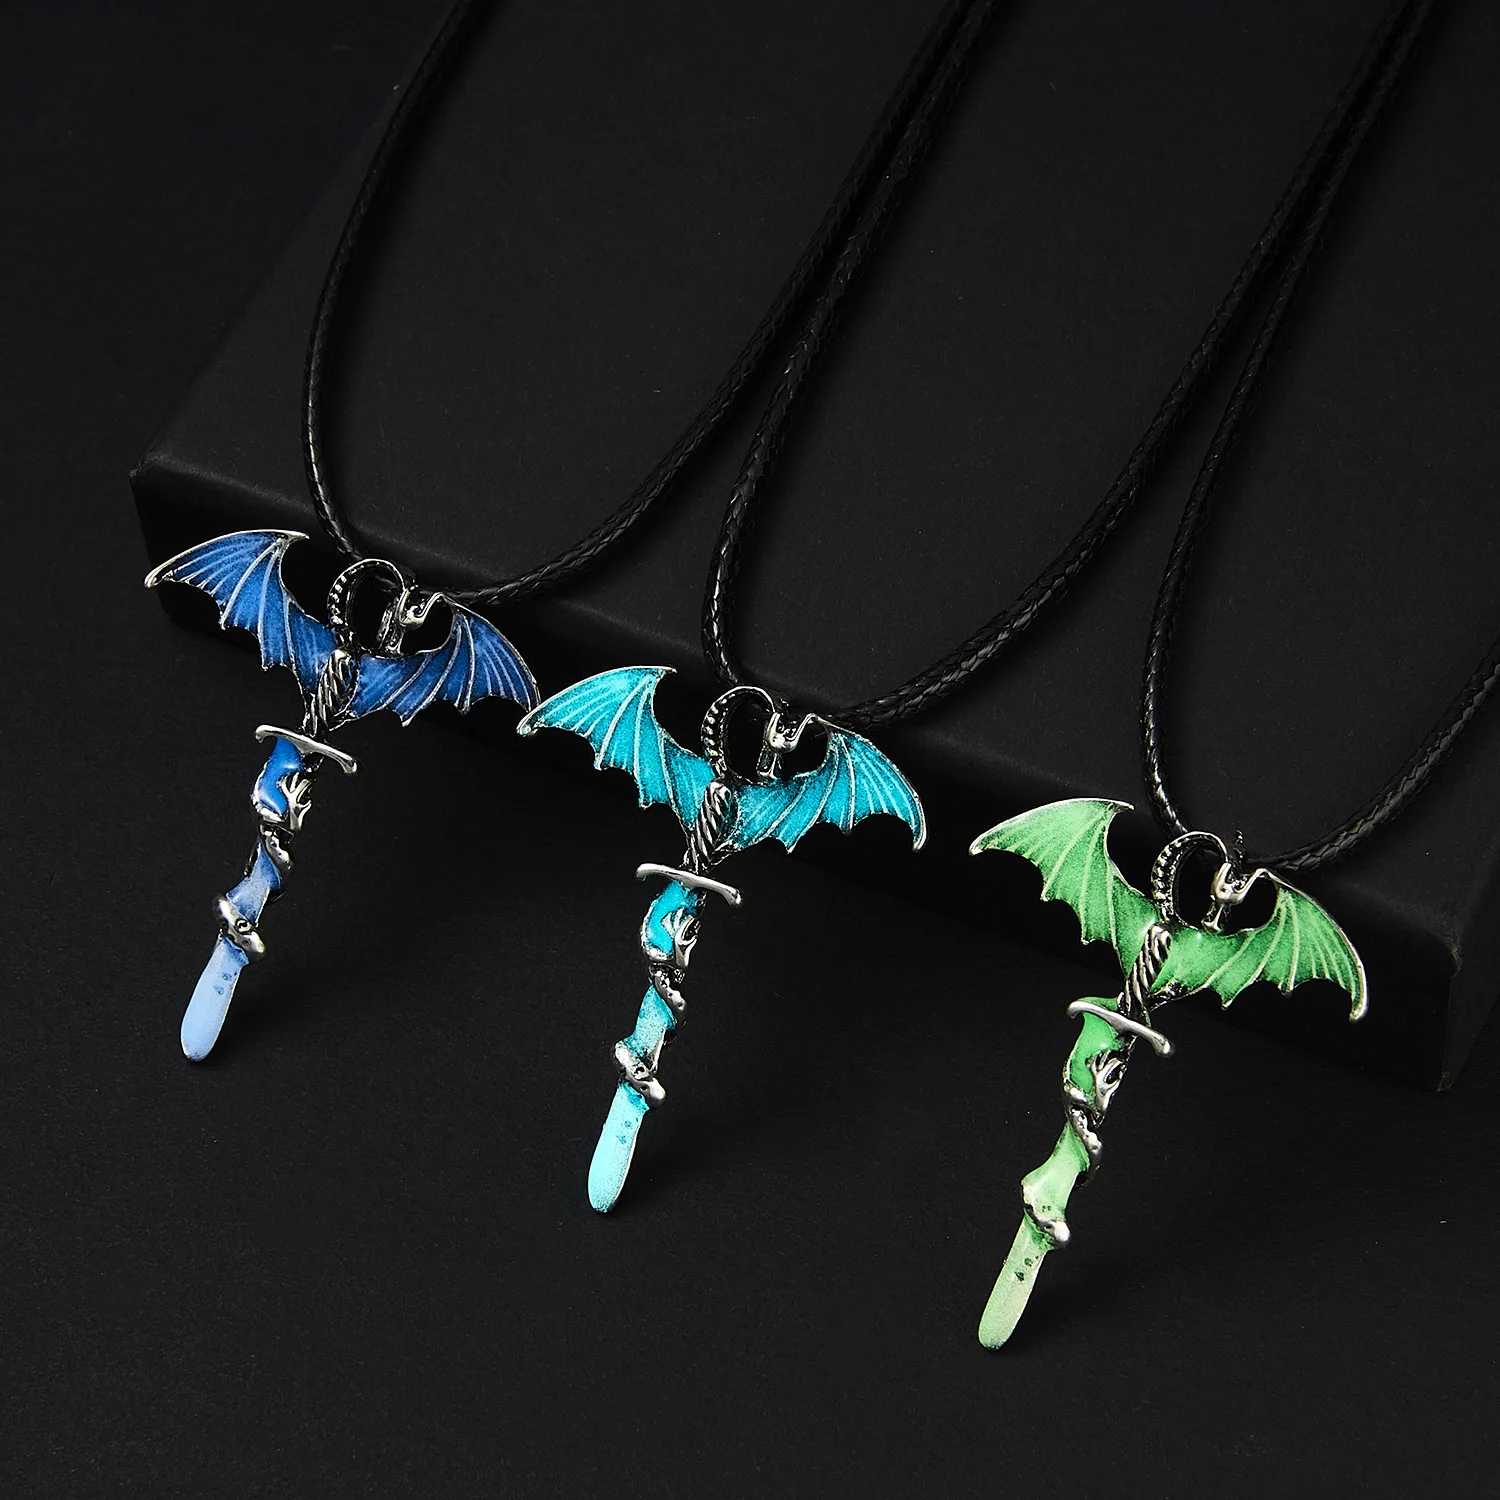 

Vintage Magic Steampunk Glowing Luminous Punk Dragon Pendants Necklaces Mens Jewelry Glow In The Dark Pendant Necklace